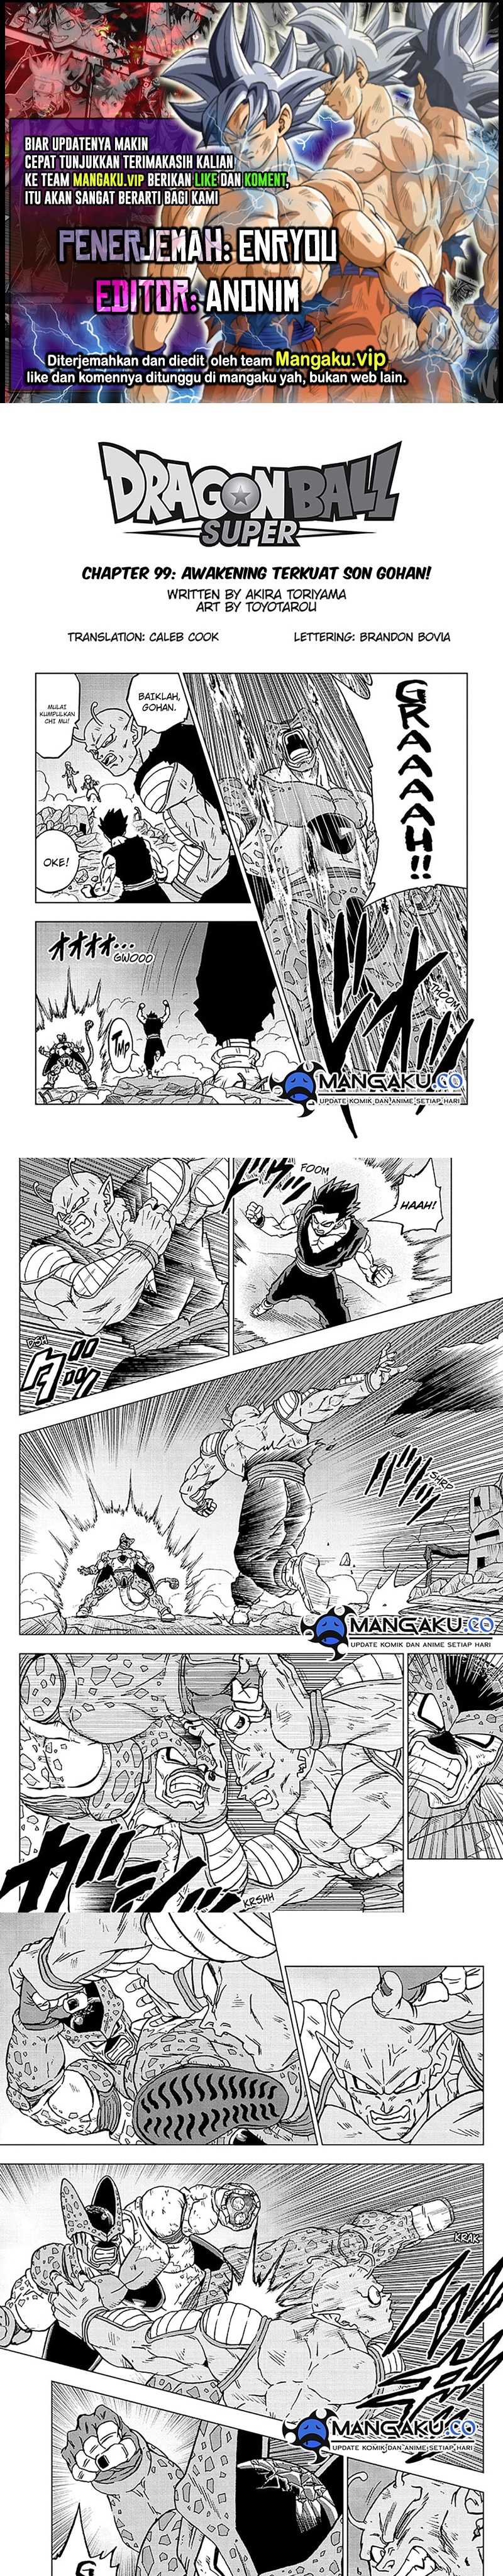 Dragon Ball Super: Chapter 100.2 - Page 1